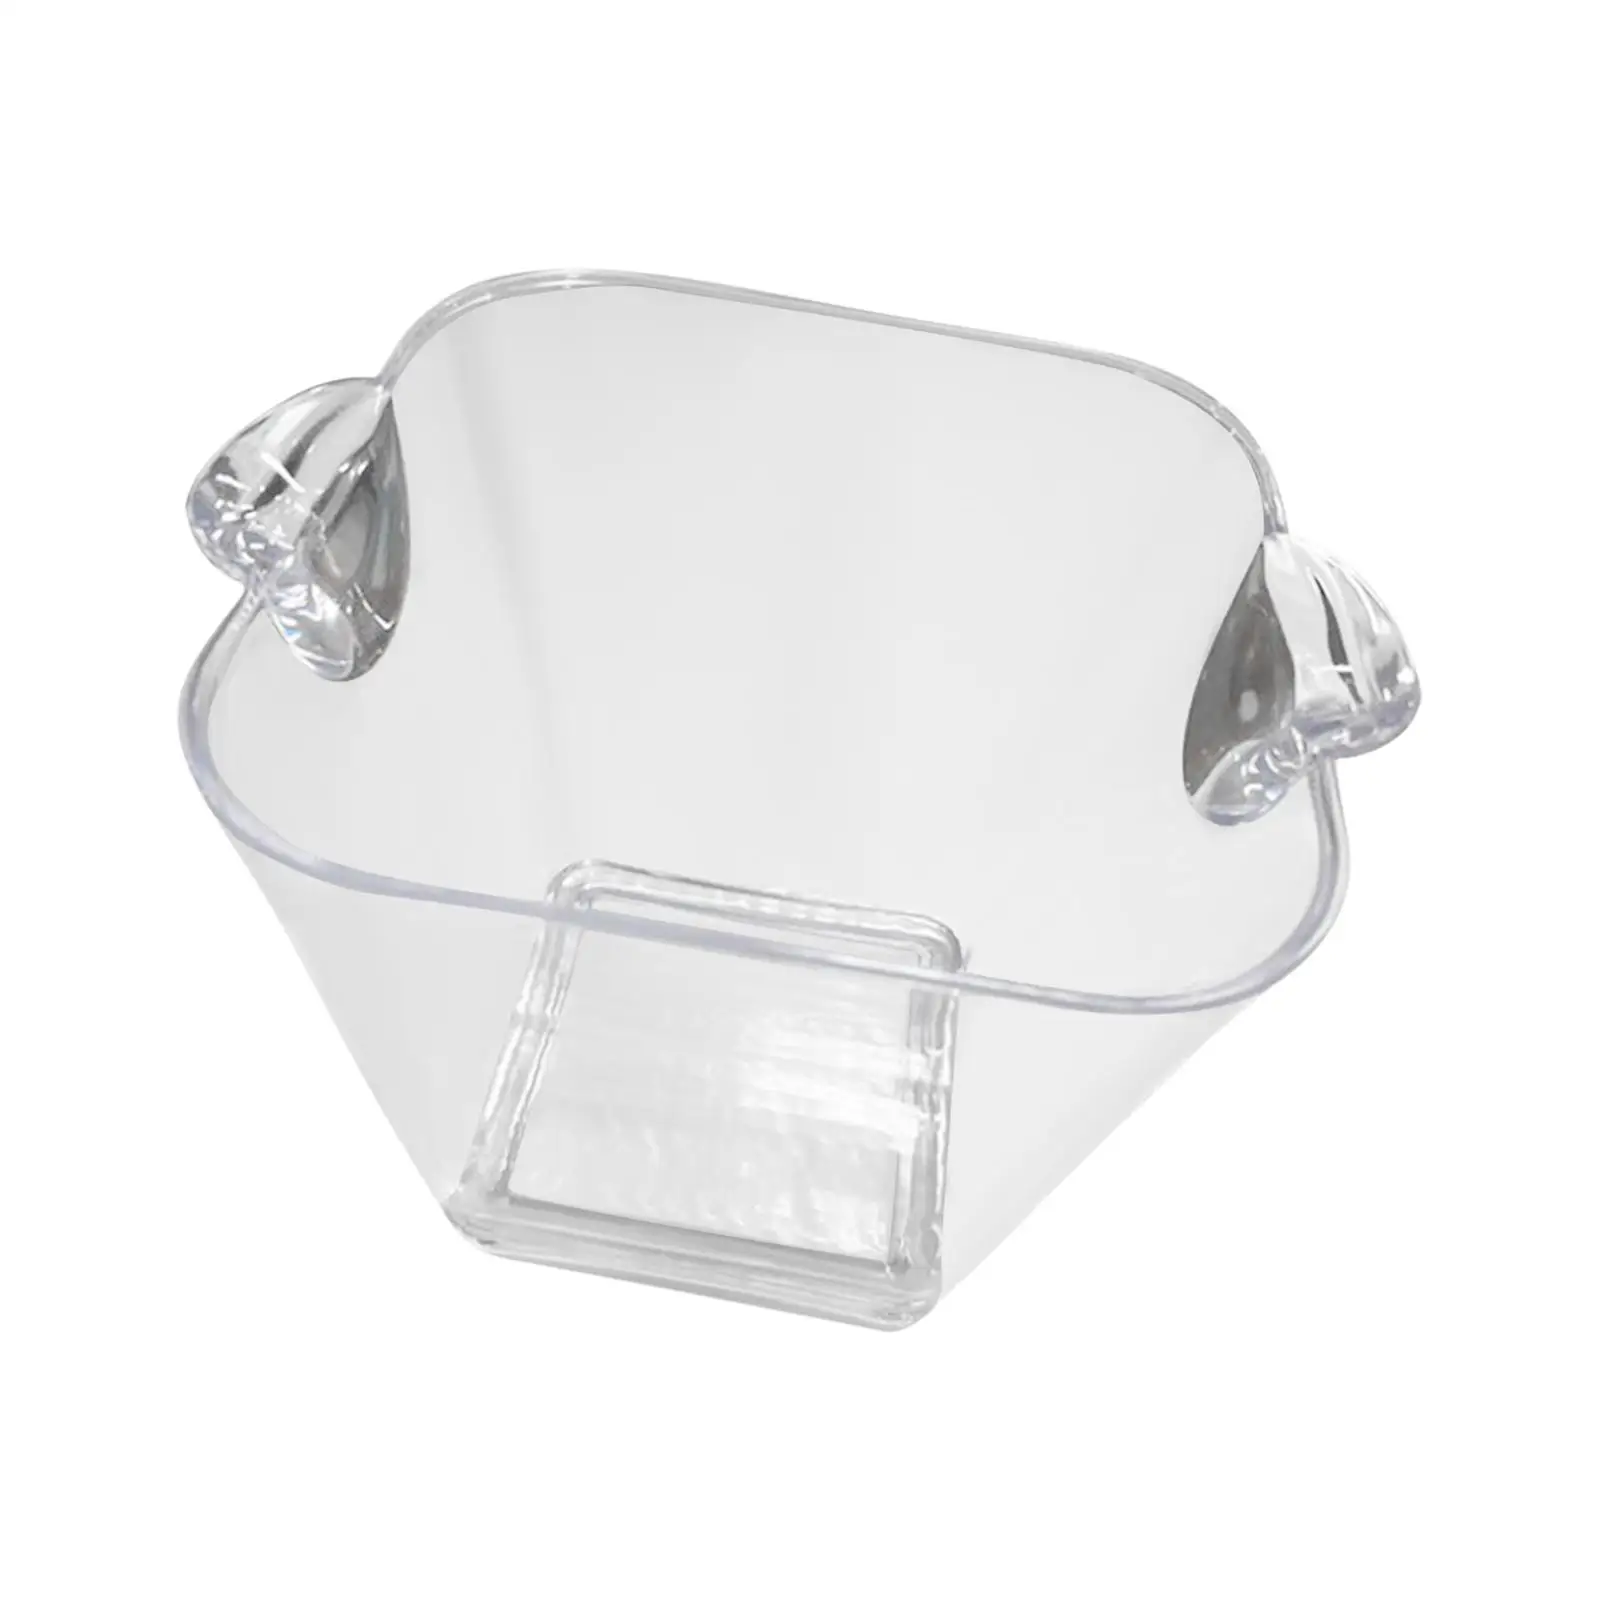 Ice Bucket Portable Storage Container for Night Supplies